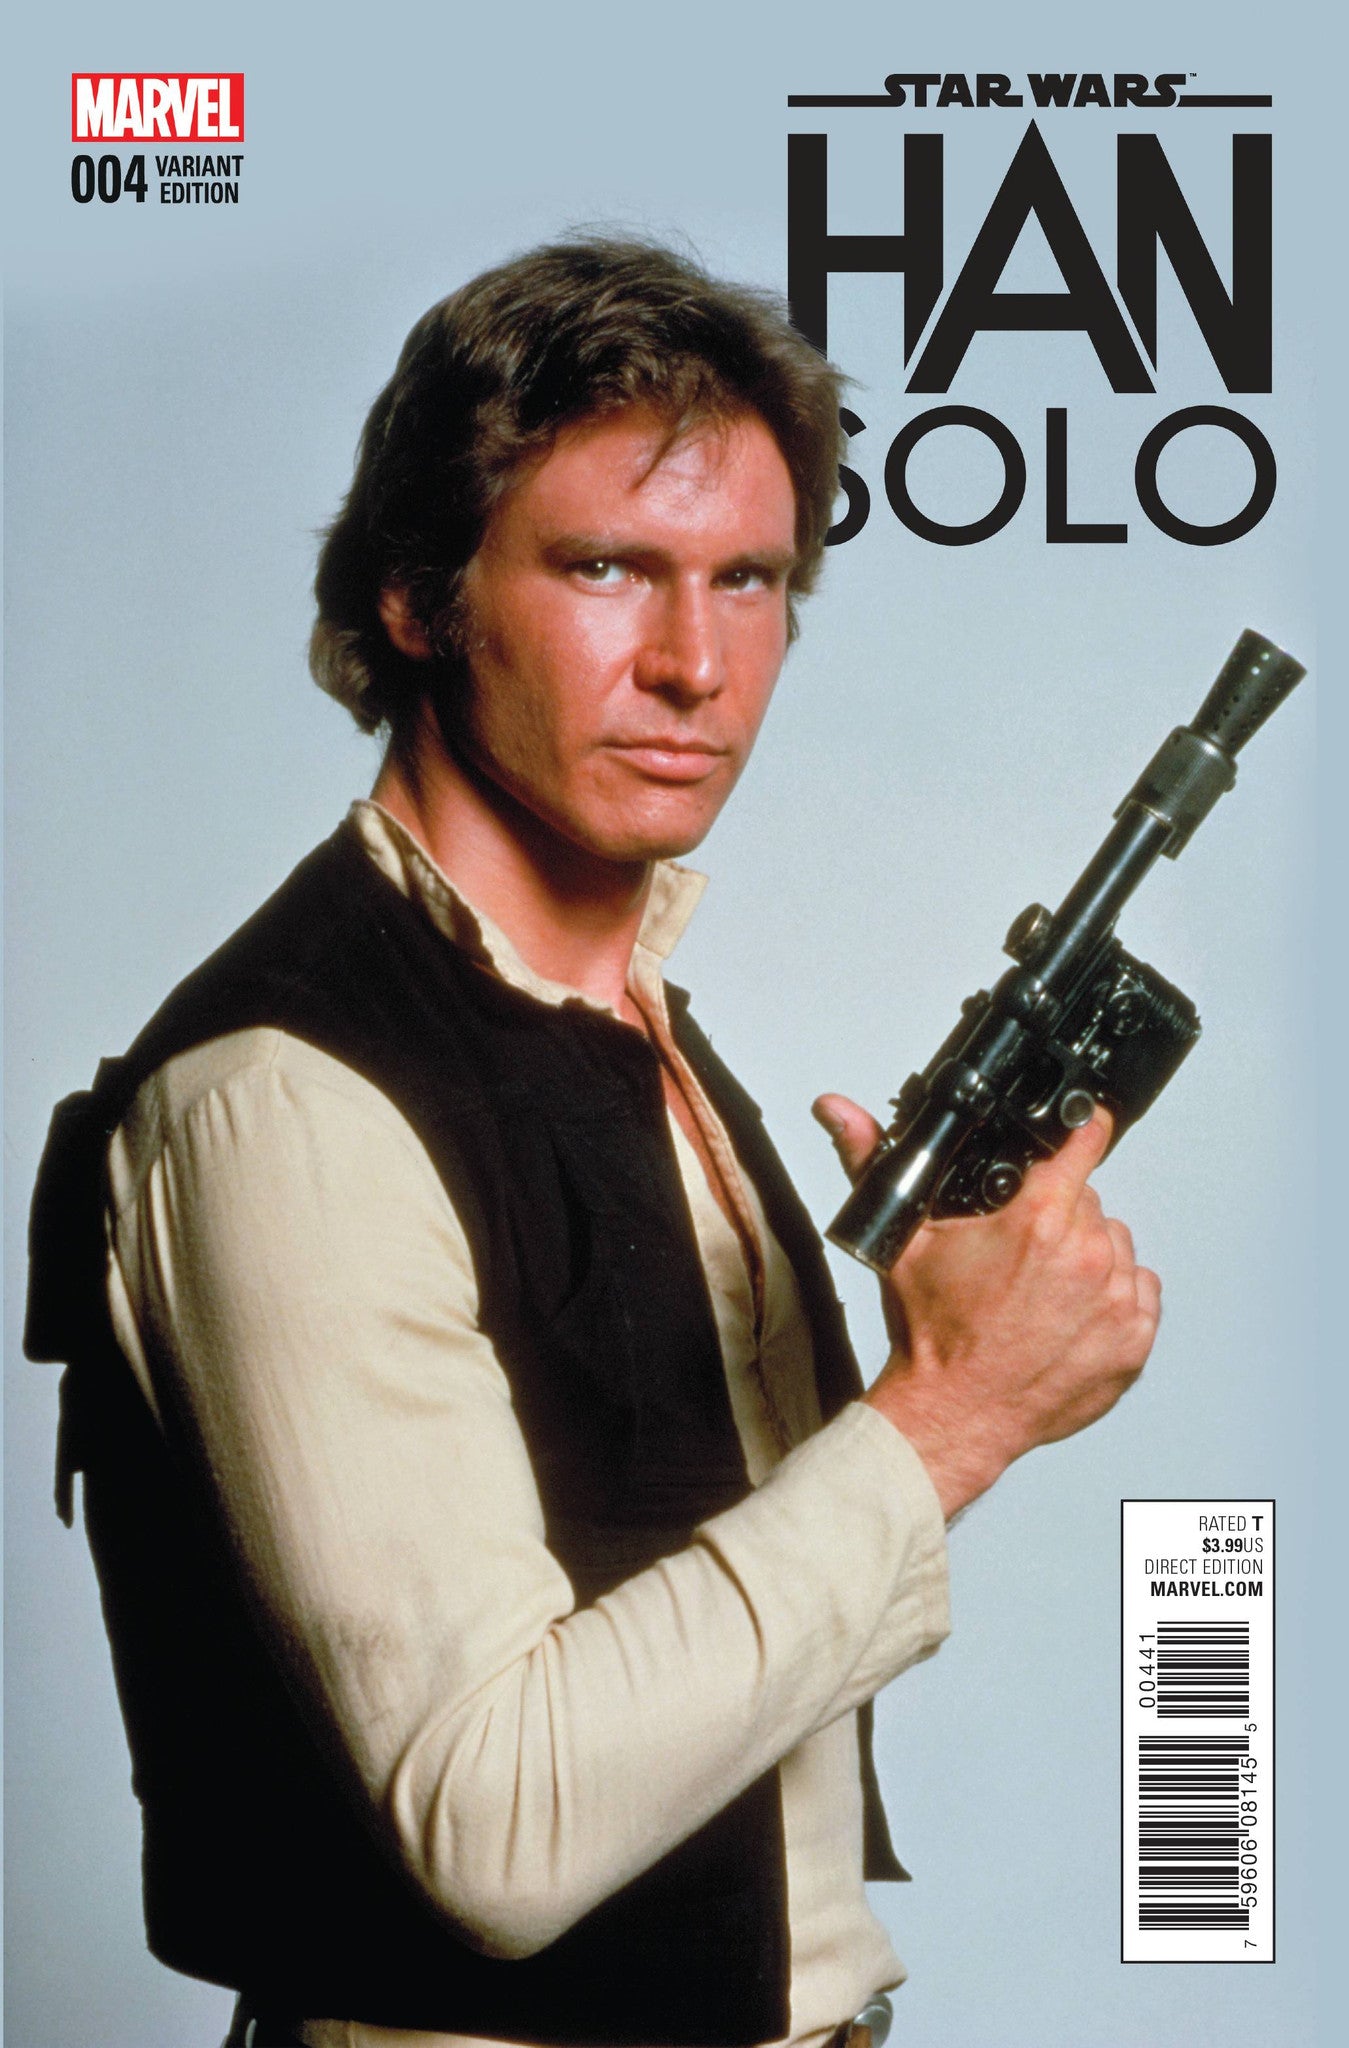 STAR WARS HAN SOLO #4 (OF 5) MOVIE VAR COVER